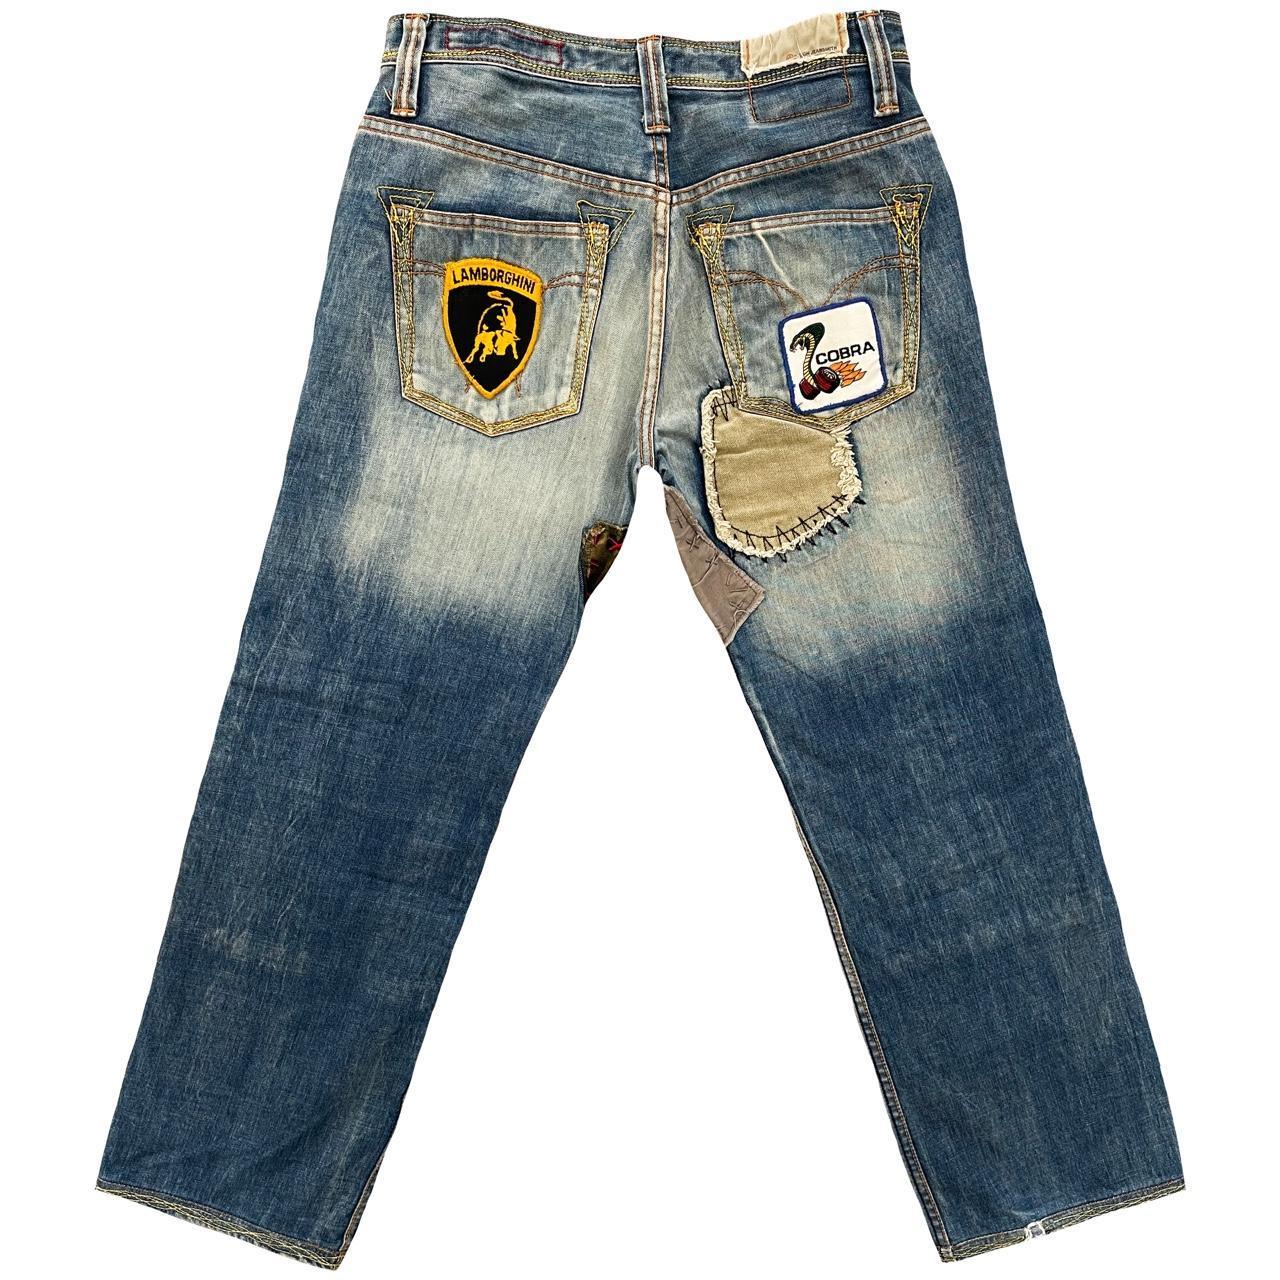 Trademark Patchwork Jeans - Known Source